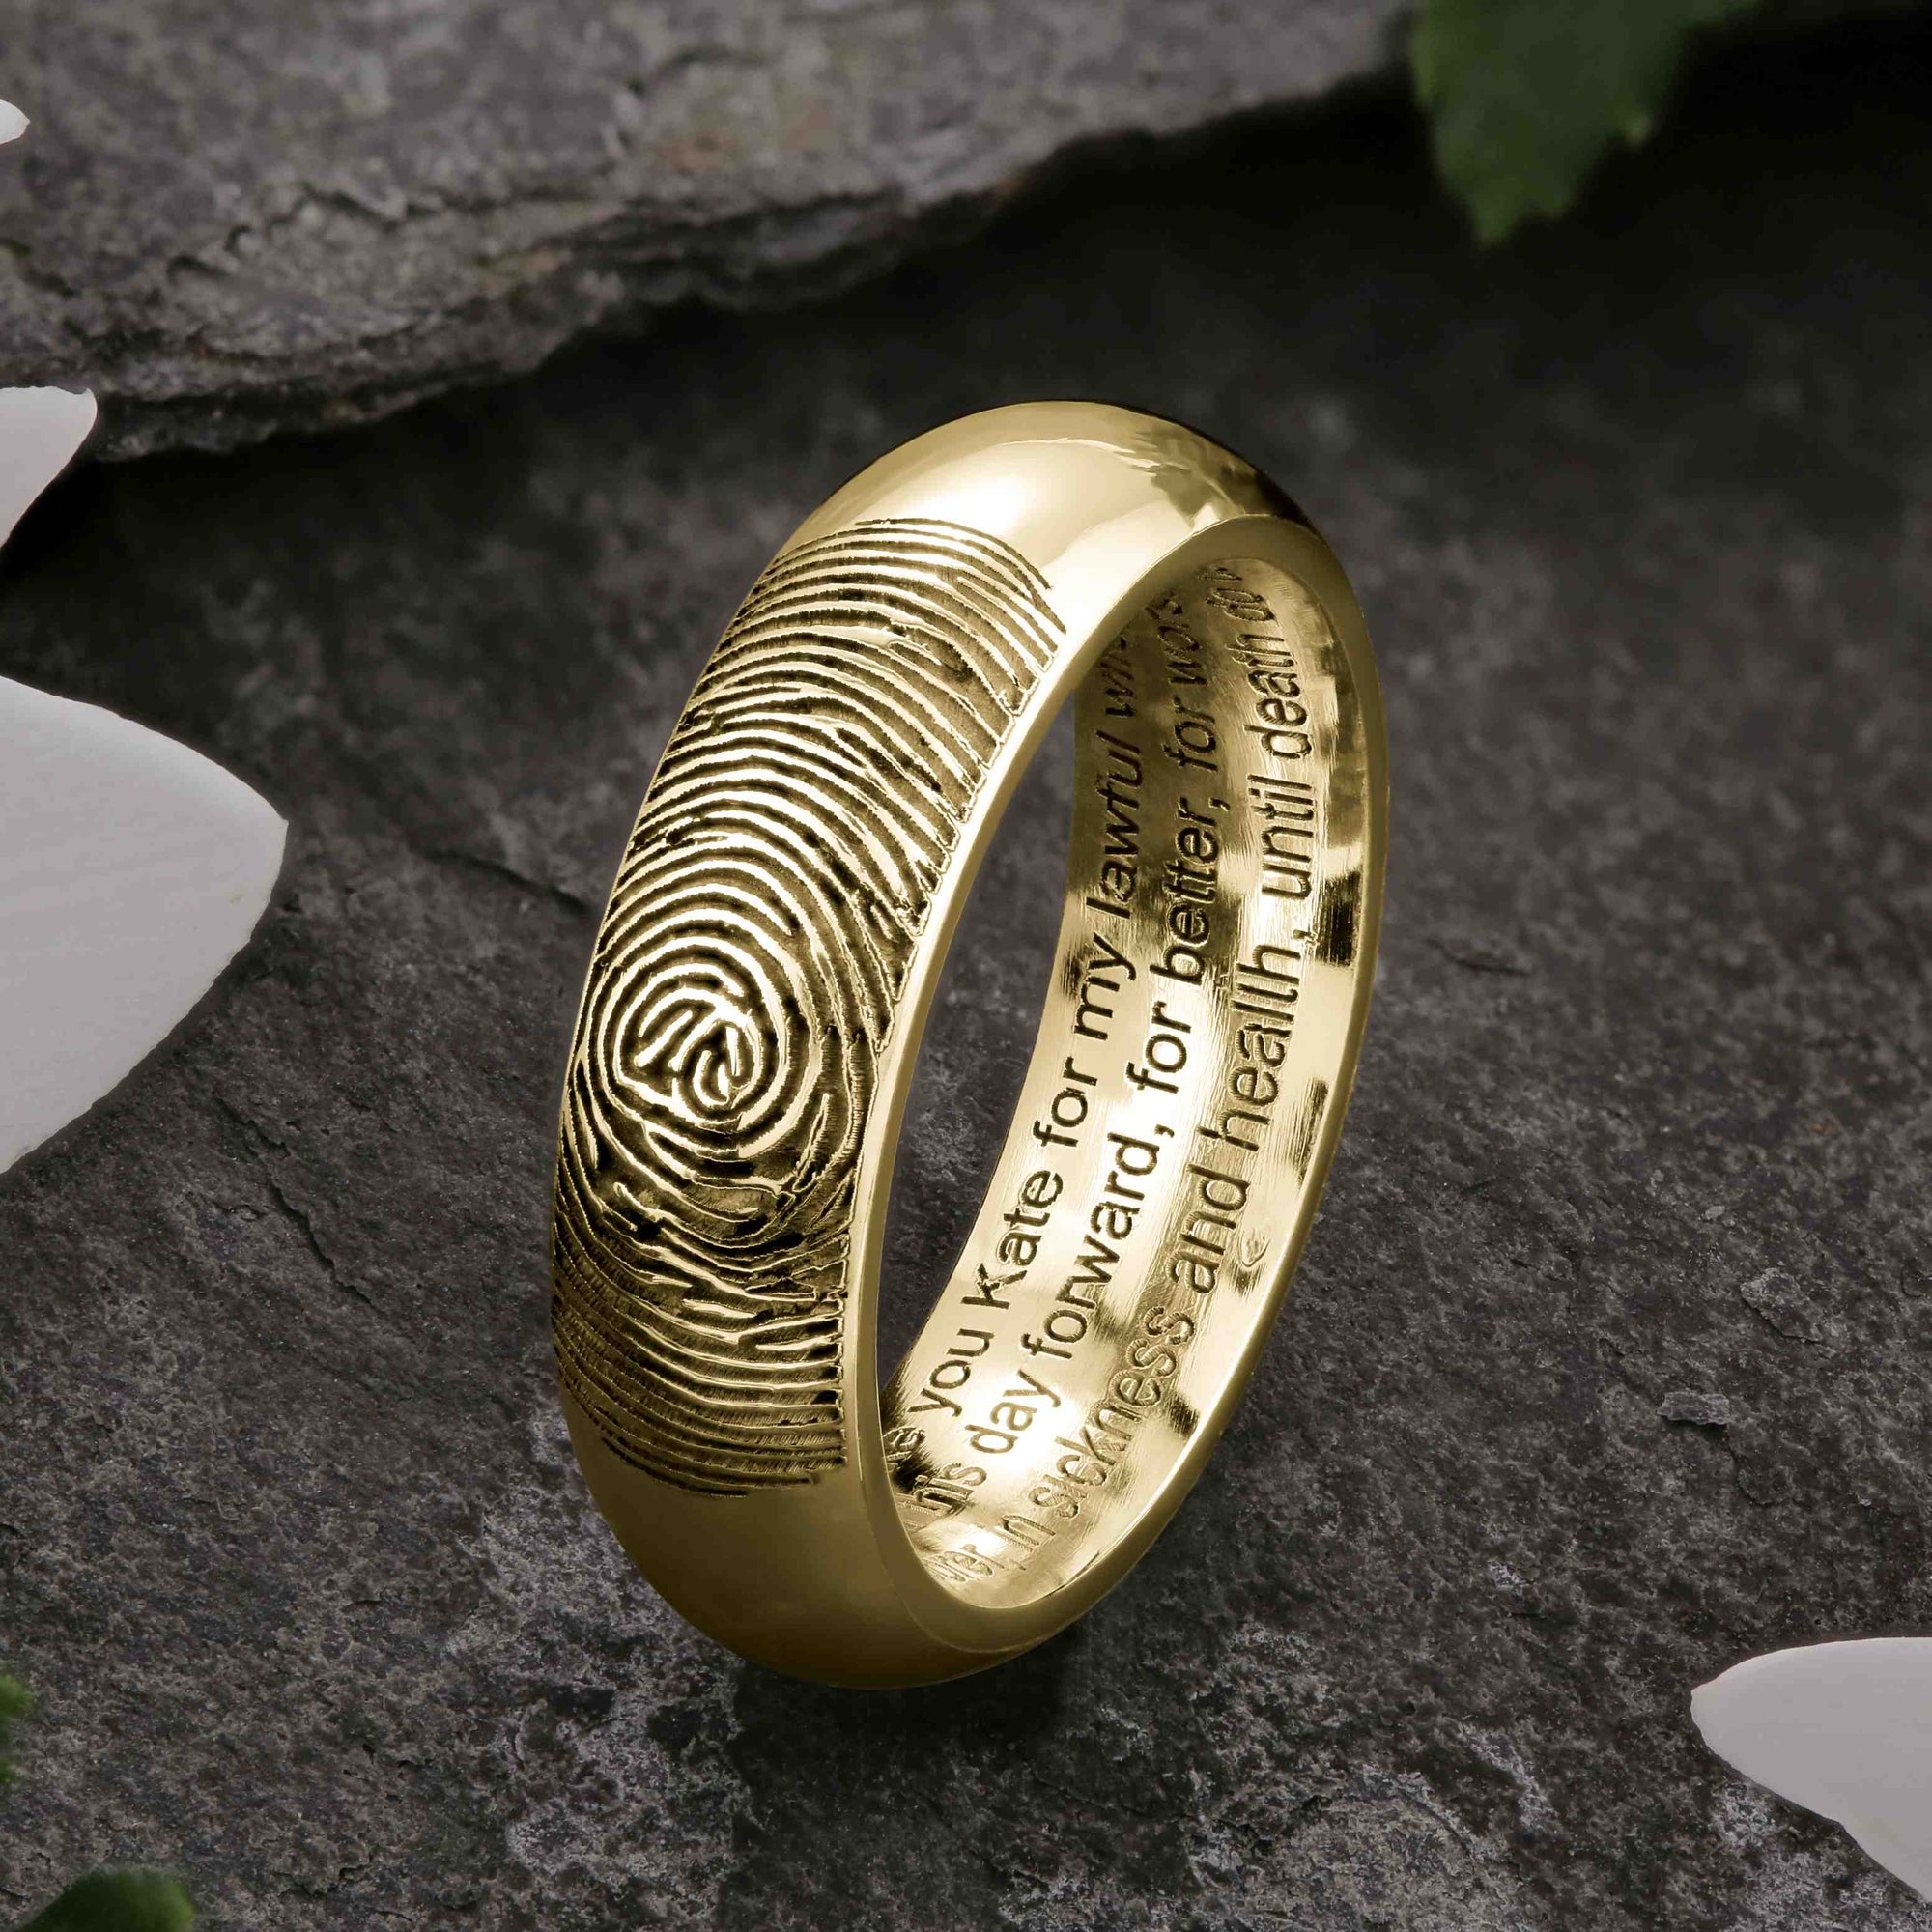 A unique Gold Wedding Ring with an engraved fingerprint on the outer surface | Engraved with personalised wedding vows on three lines on the inside of the ring | Contemporary Laser engraving | Mens 6mm wide, comfort court profile ring | Custom personalised wedding jewellery | Sophia Alexander Fingerprint Jewellery | Handmade in Suffolk UK